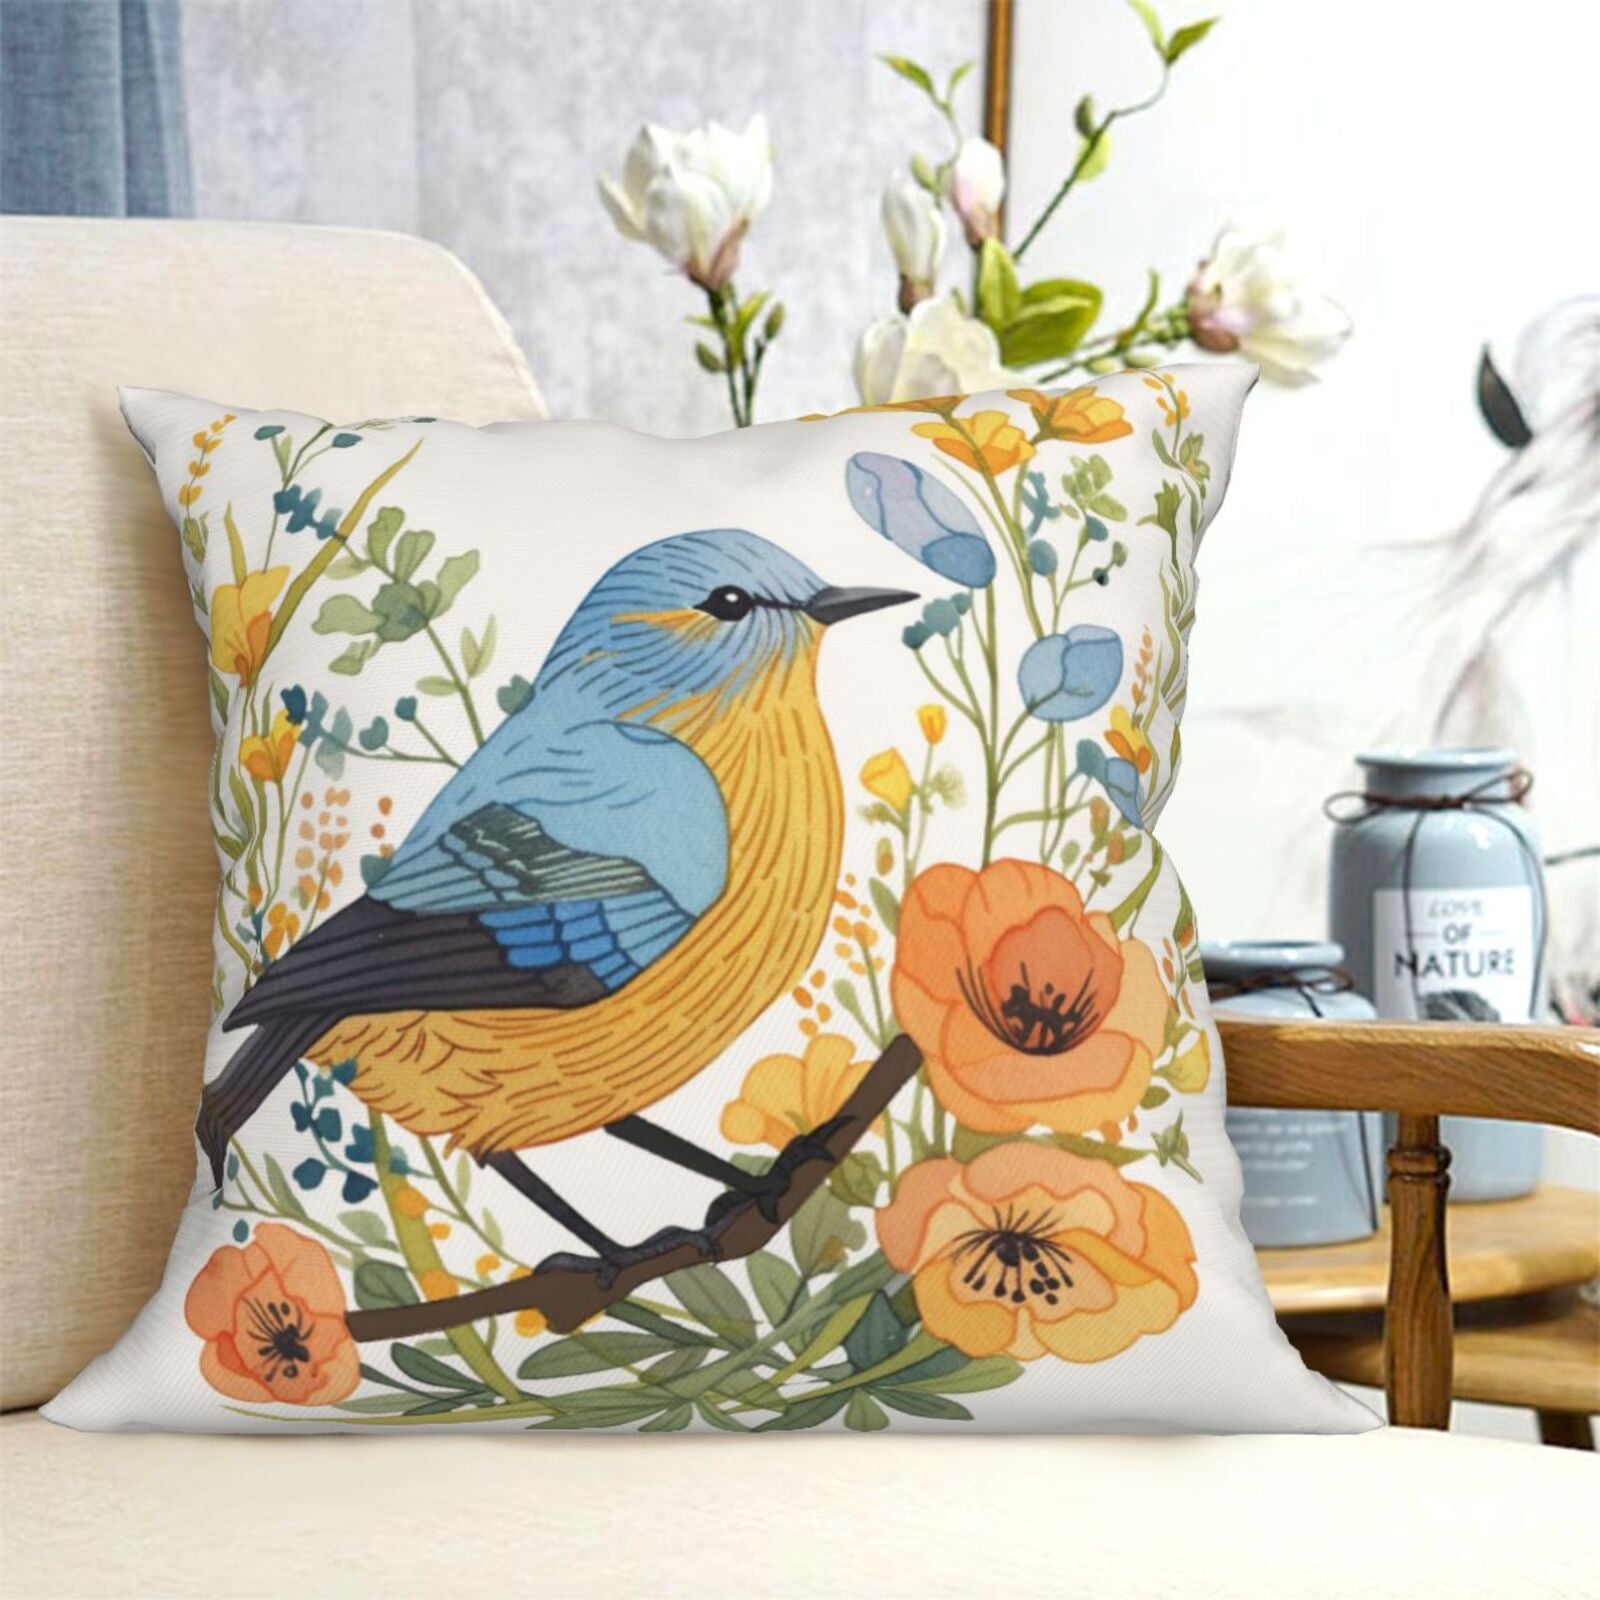 Throw Pillow Covers Bird and Fish in The Two World Forever Cushion Pillow  Case Home Decor Pillowcase 18x18 Inches